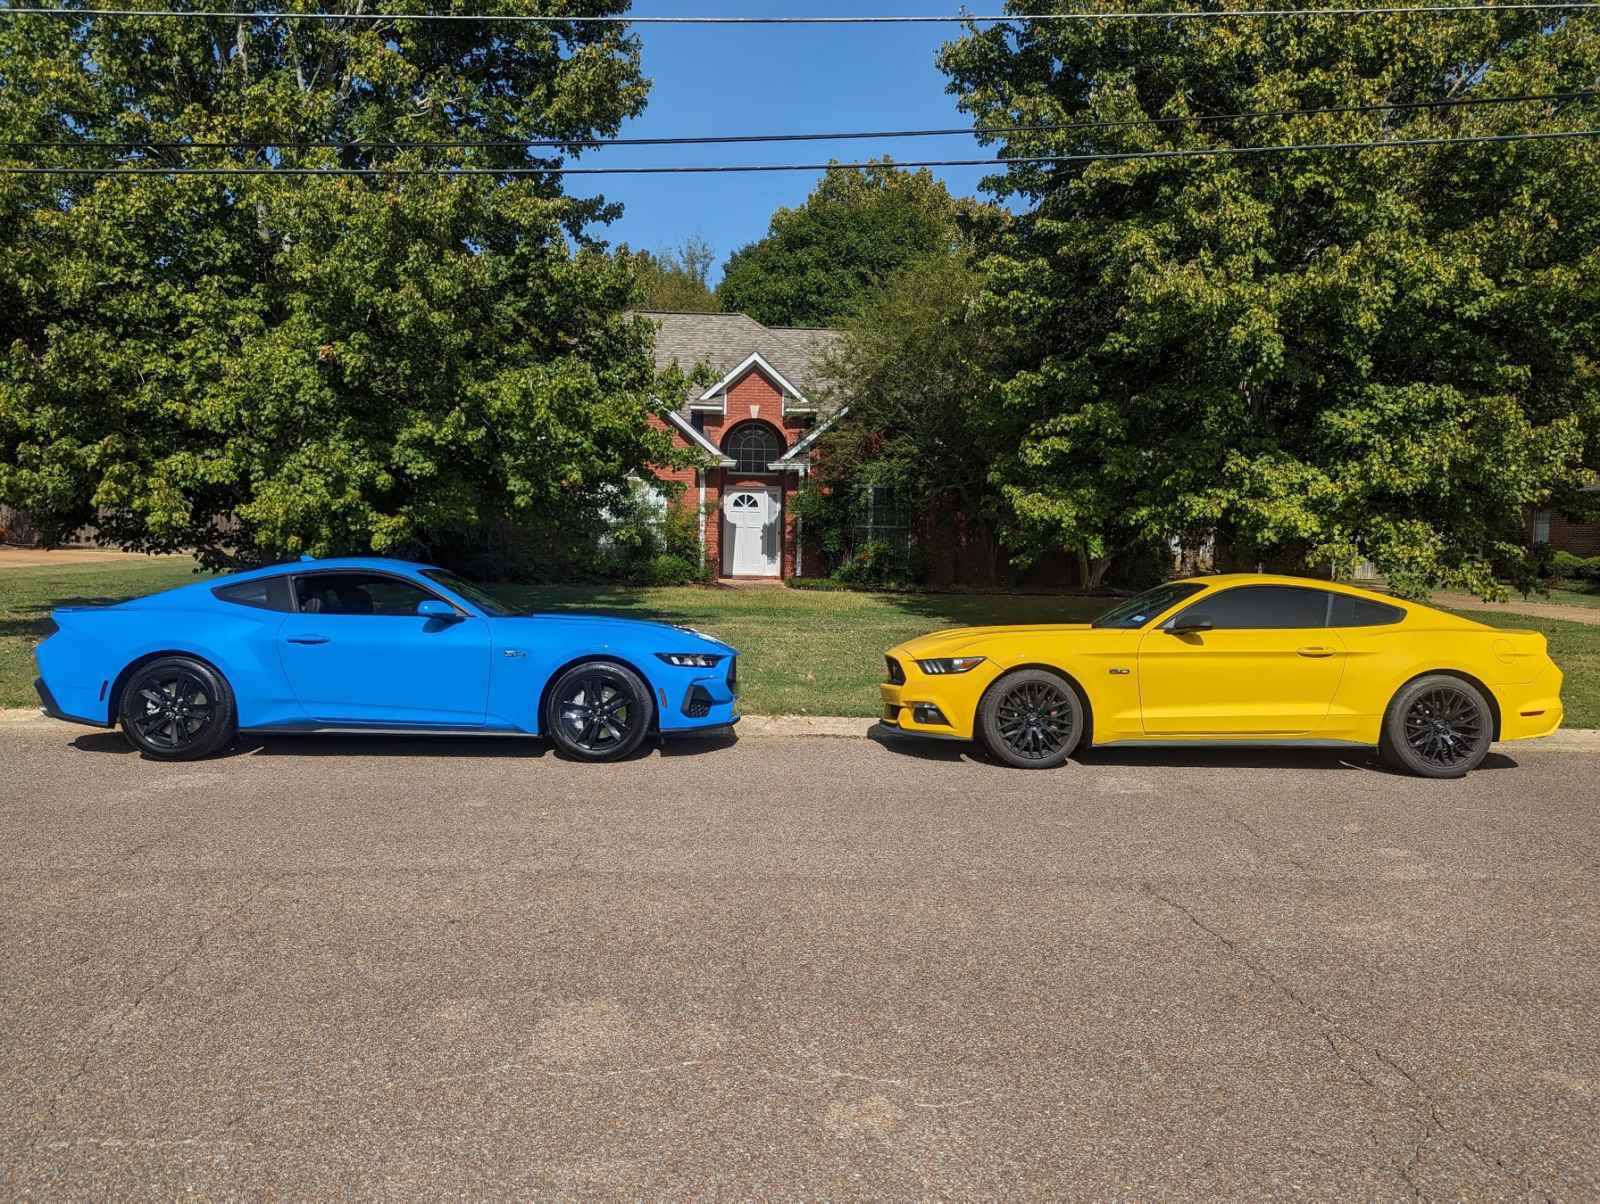 S650 Mustang Show off your stang! IMG-aa71948a96050a0560c5f8db67c3b73a-V